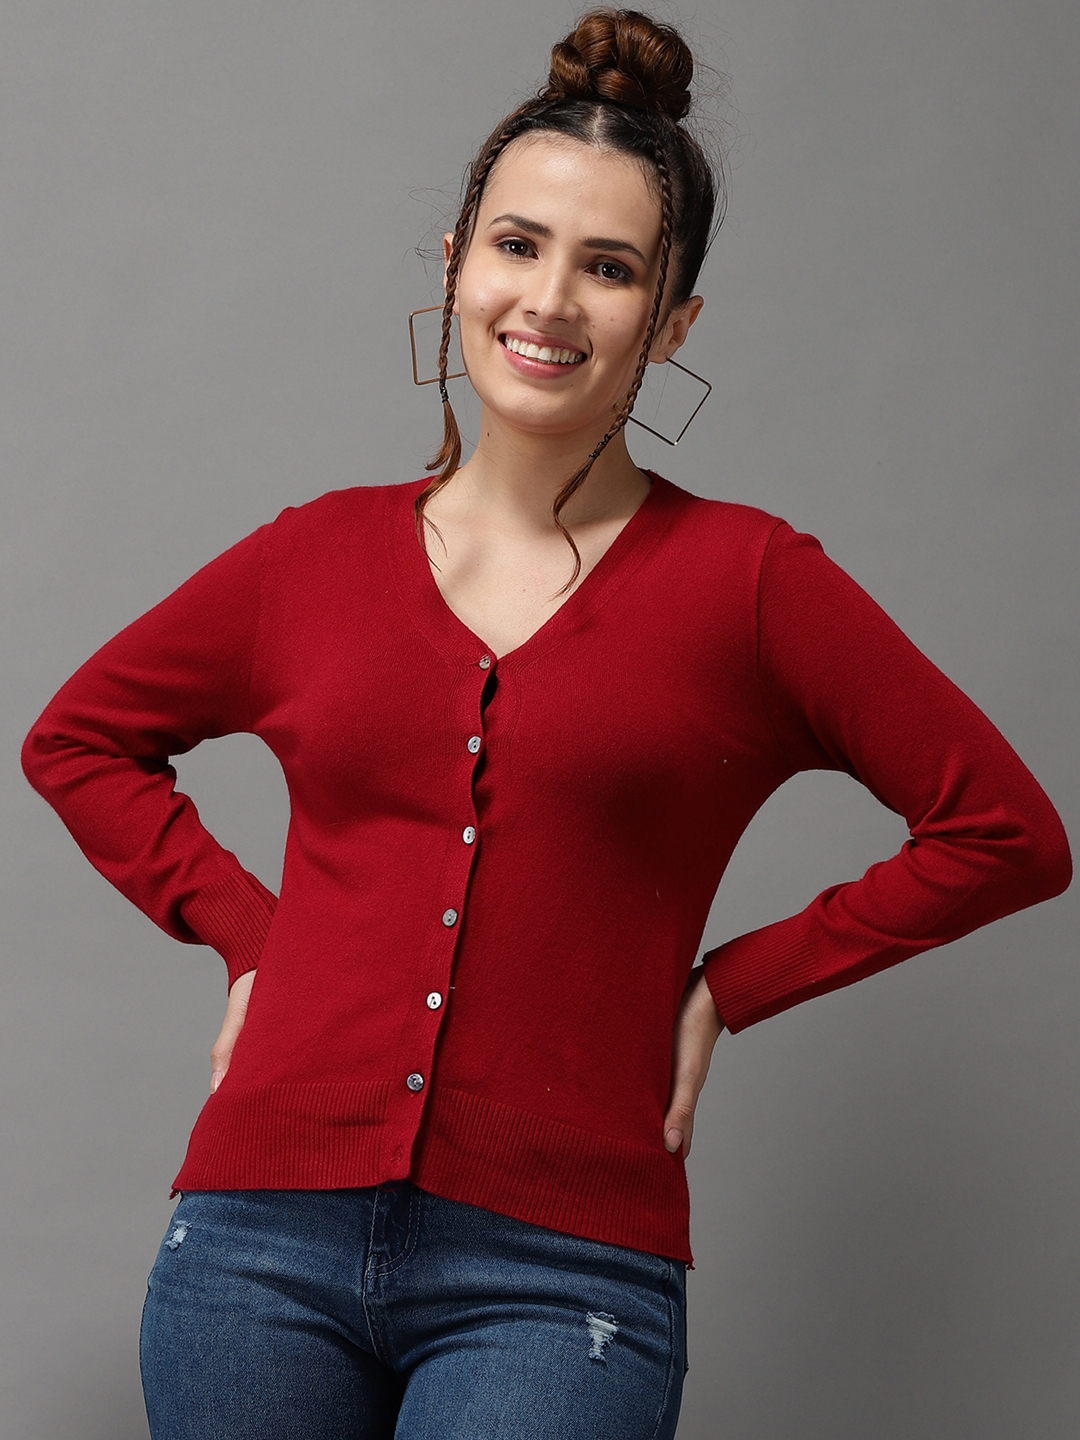 Women's Red Acrylic Solid Sweaters